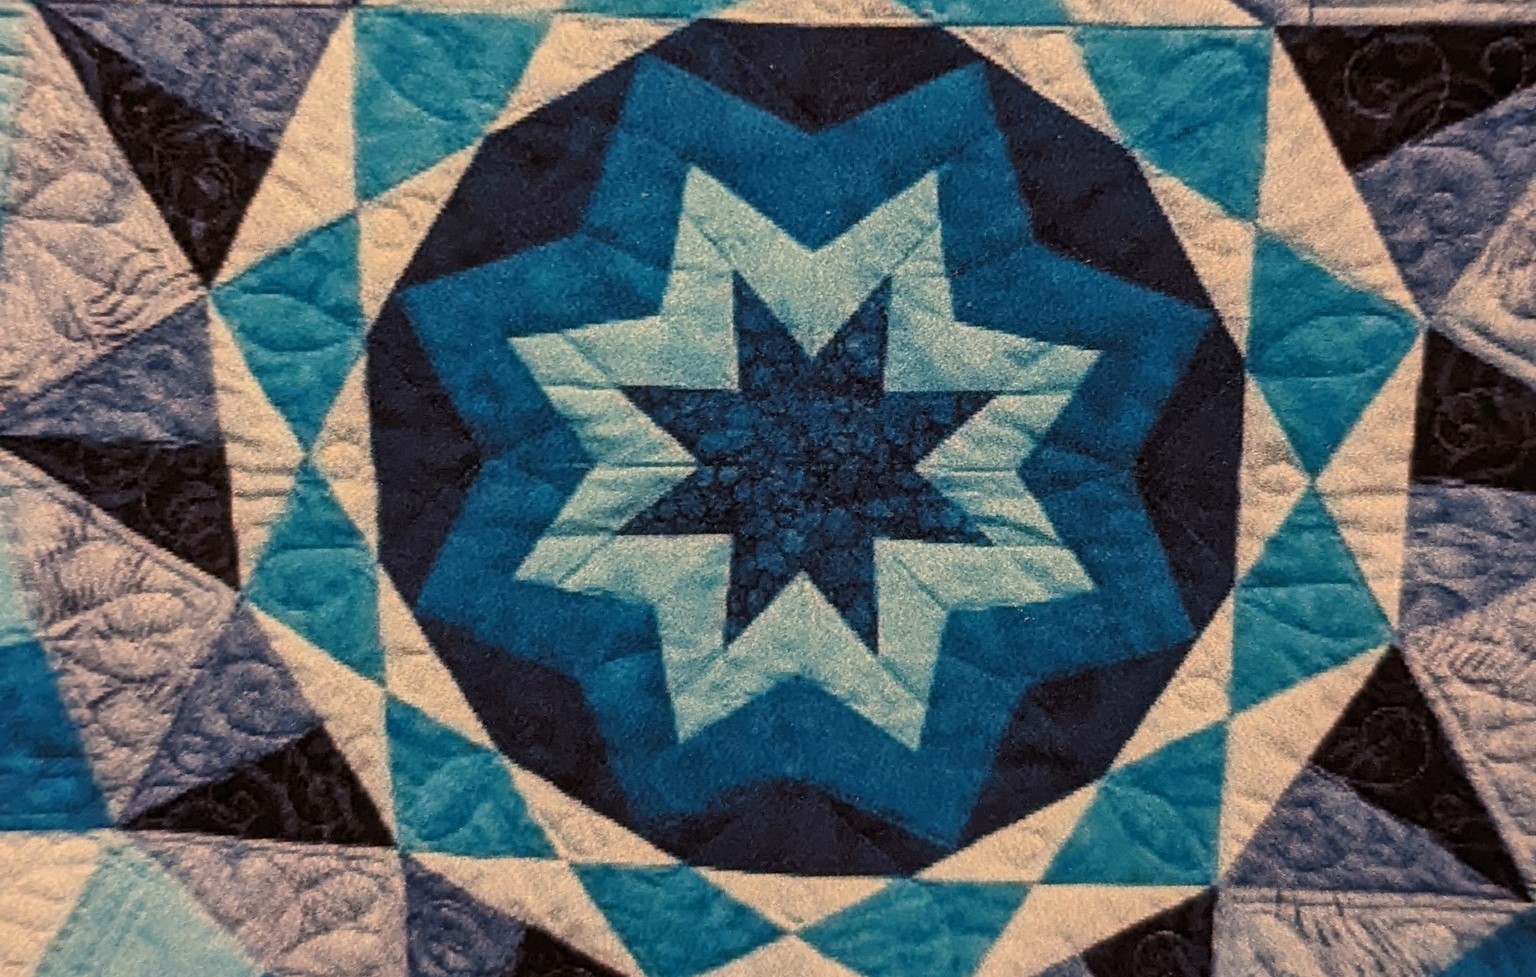 Thread Bears Quilters’ HomeTown Quilt Show